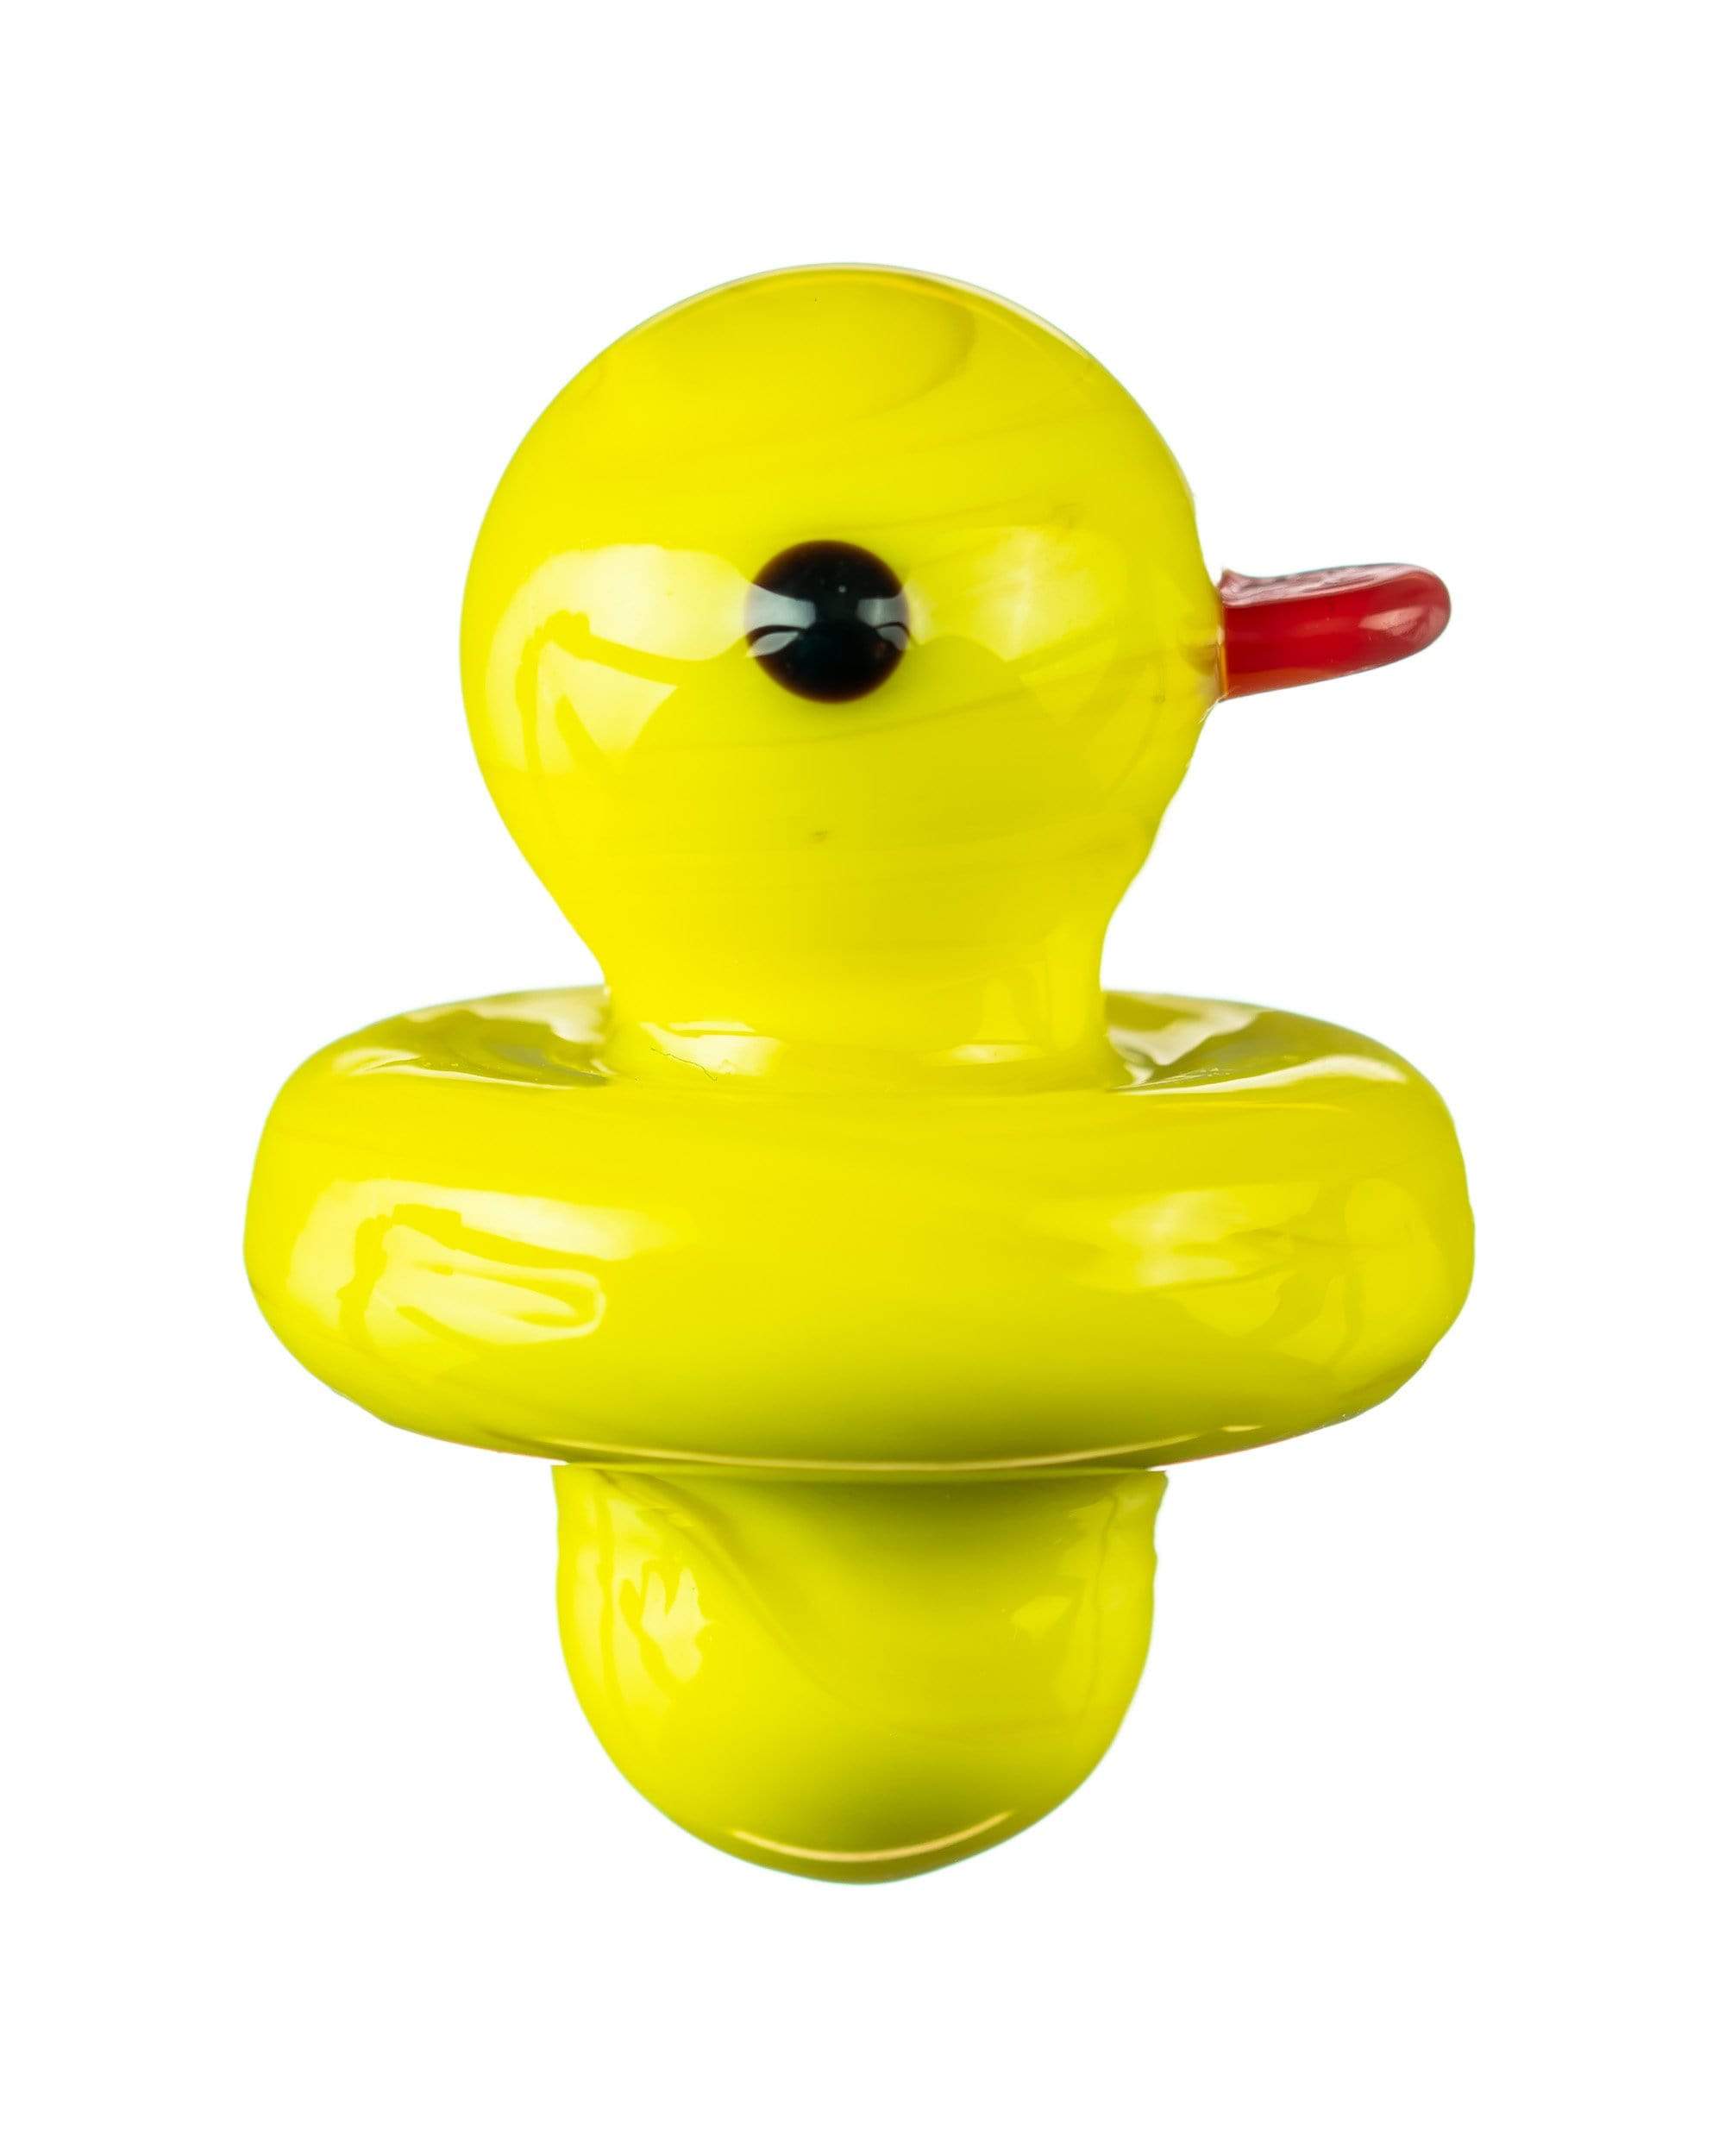 Glass Ducky Carb Cap